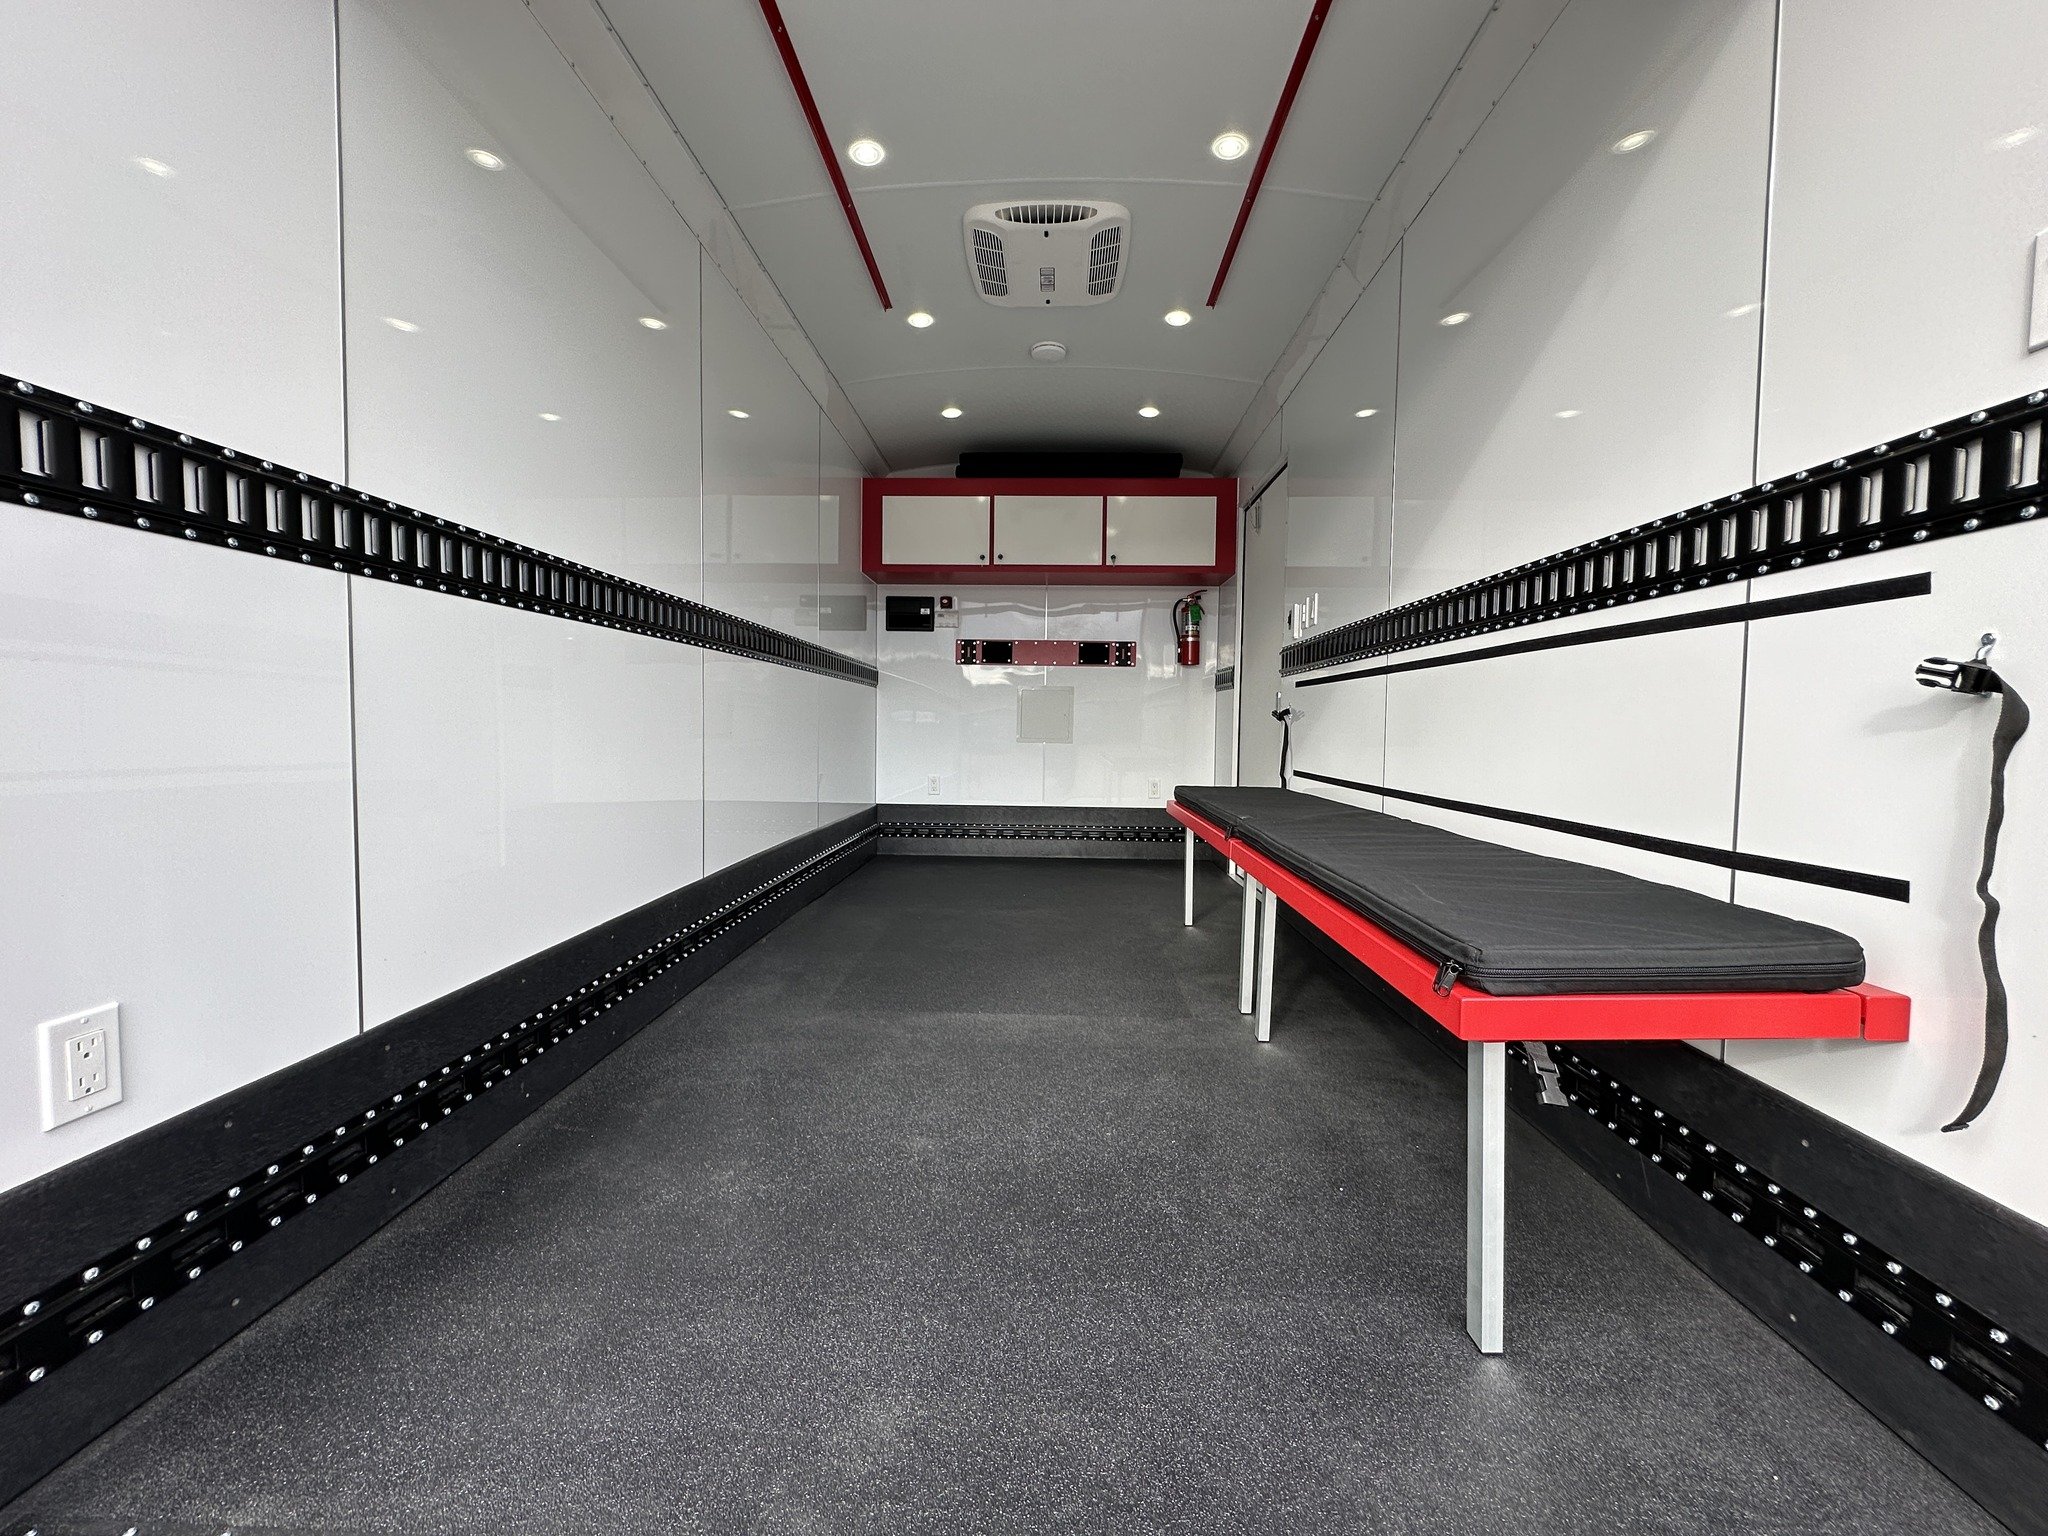 Get back in the fight, faster! 👩&zwj;🚒

Western Shelter's firefighter rehab trailers offer a haven for crews to recover safely.

Customizable options and on-site training included!

#KeepingFirefightersSafe
#FirefighterSupport
#WesternShelter